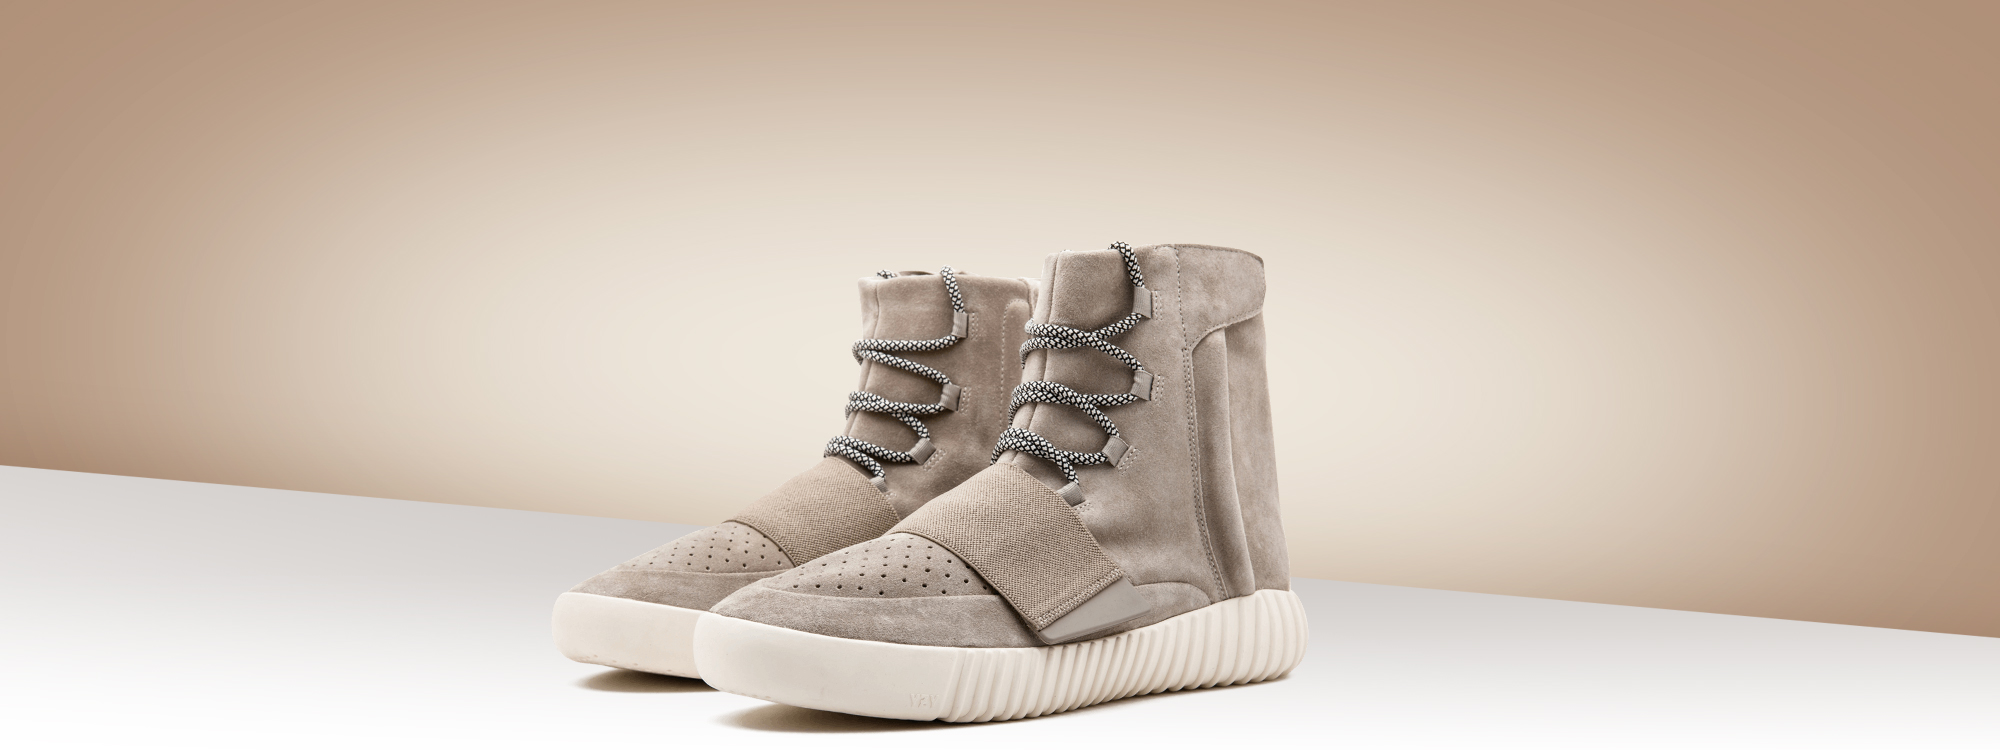 buy real  Yeezy Boost 750  Gray / White for 265 USD only